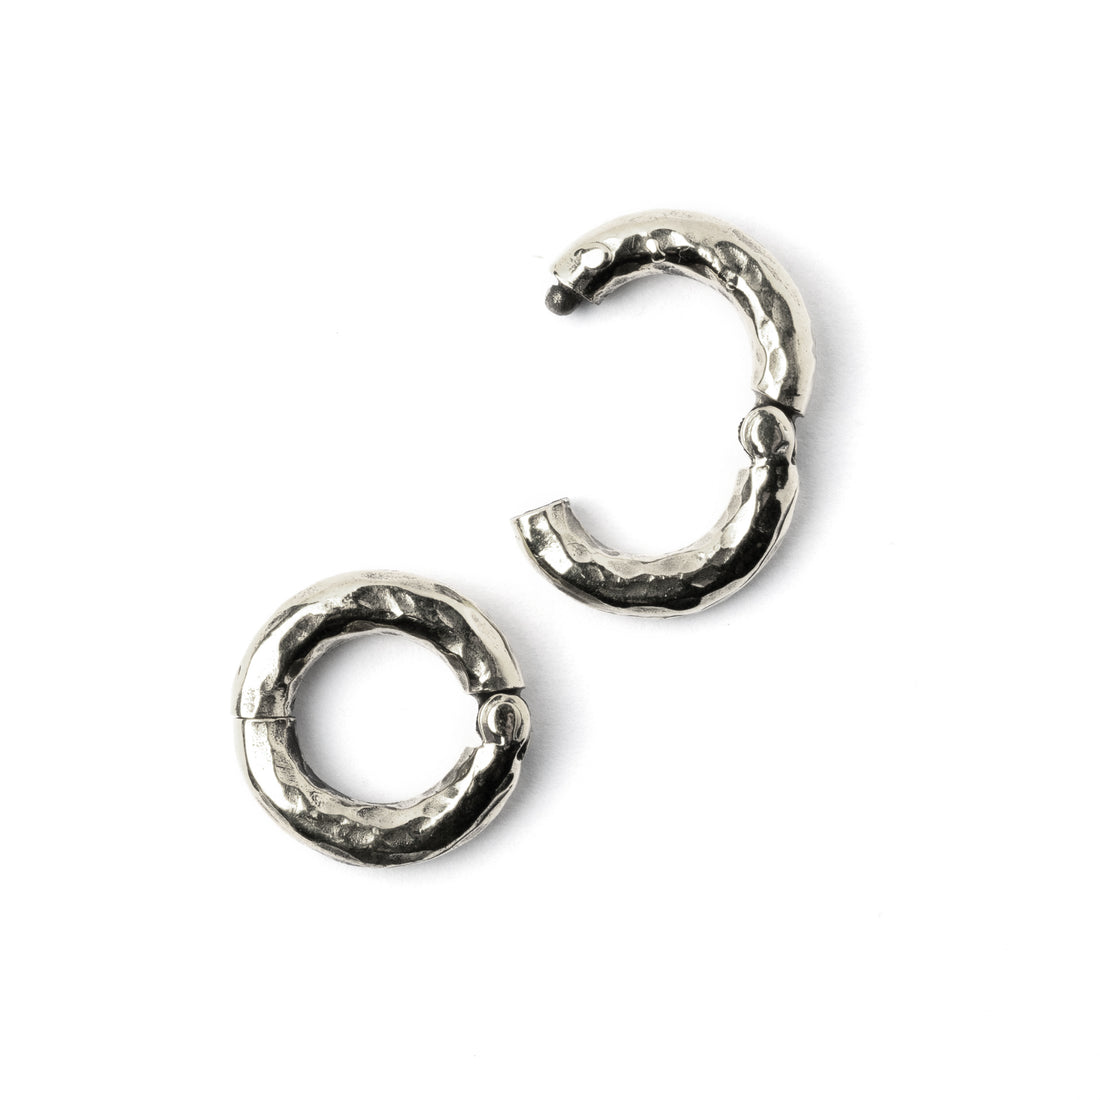 silver hammered gauge hoops open mode and close mode frontal view